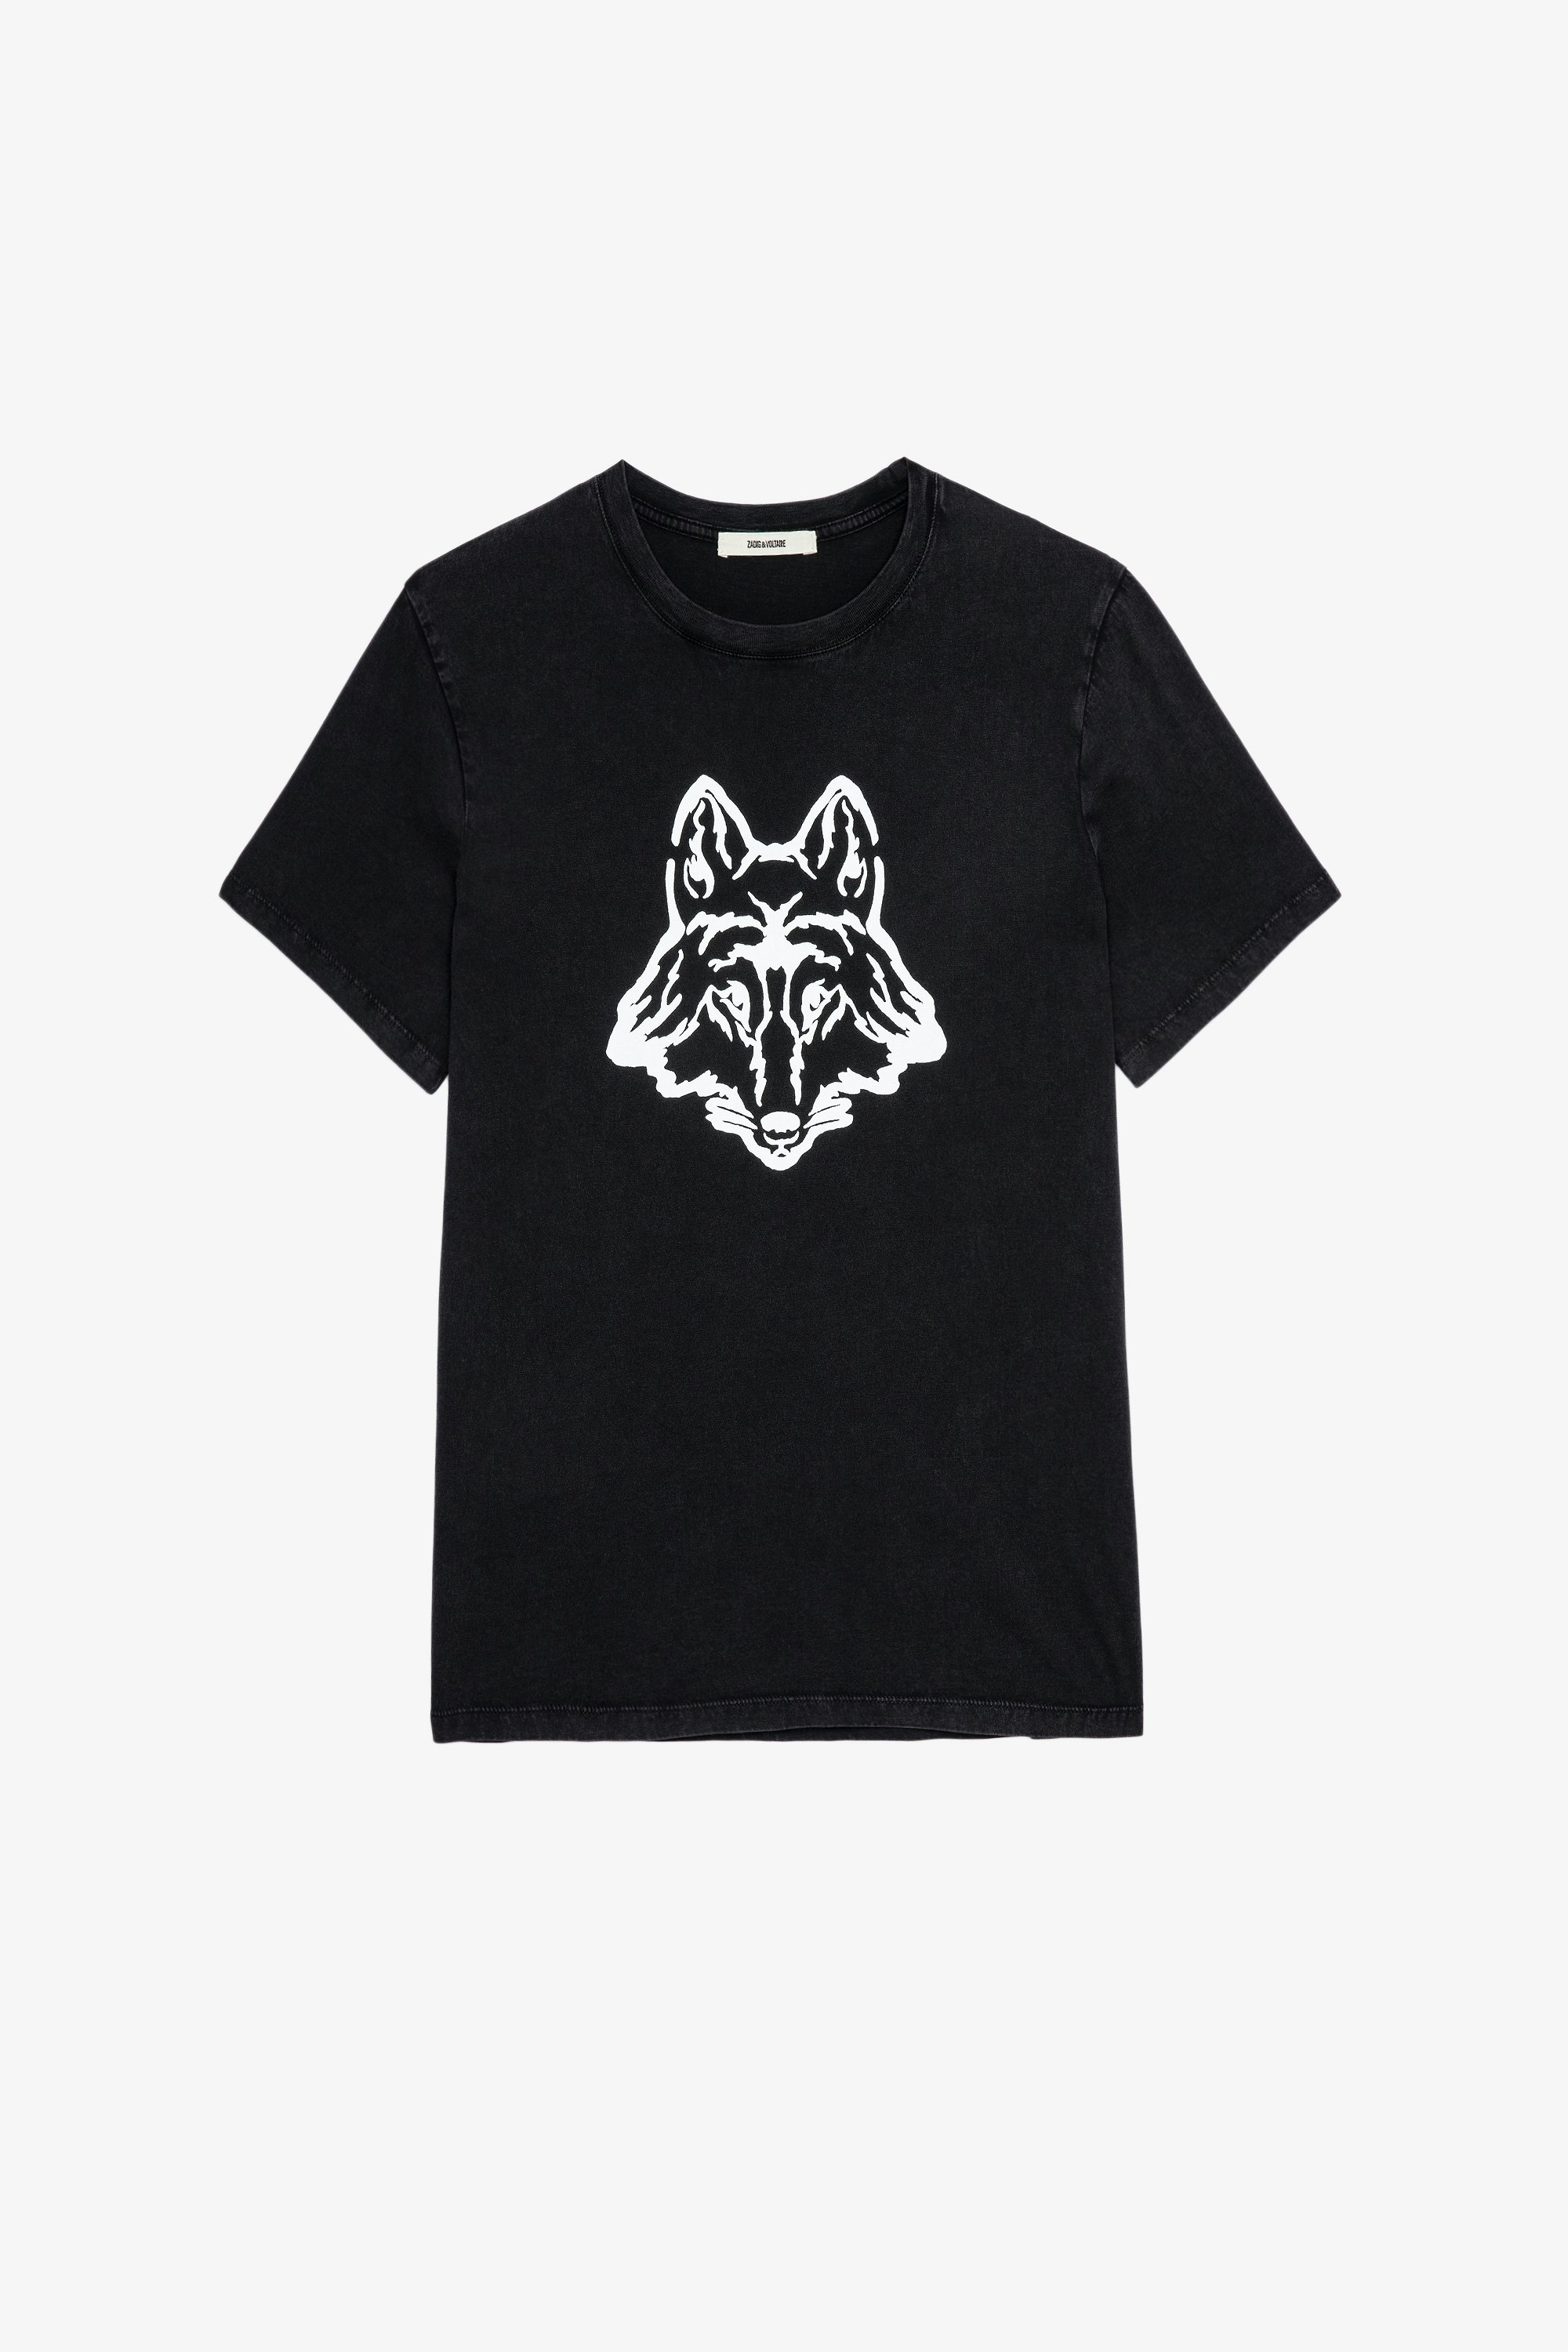 Tommy T-shirt Men's black cotton T-shirt with wolf print